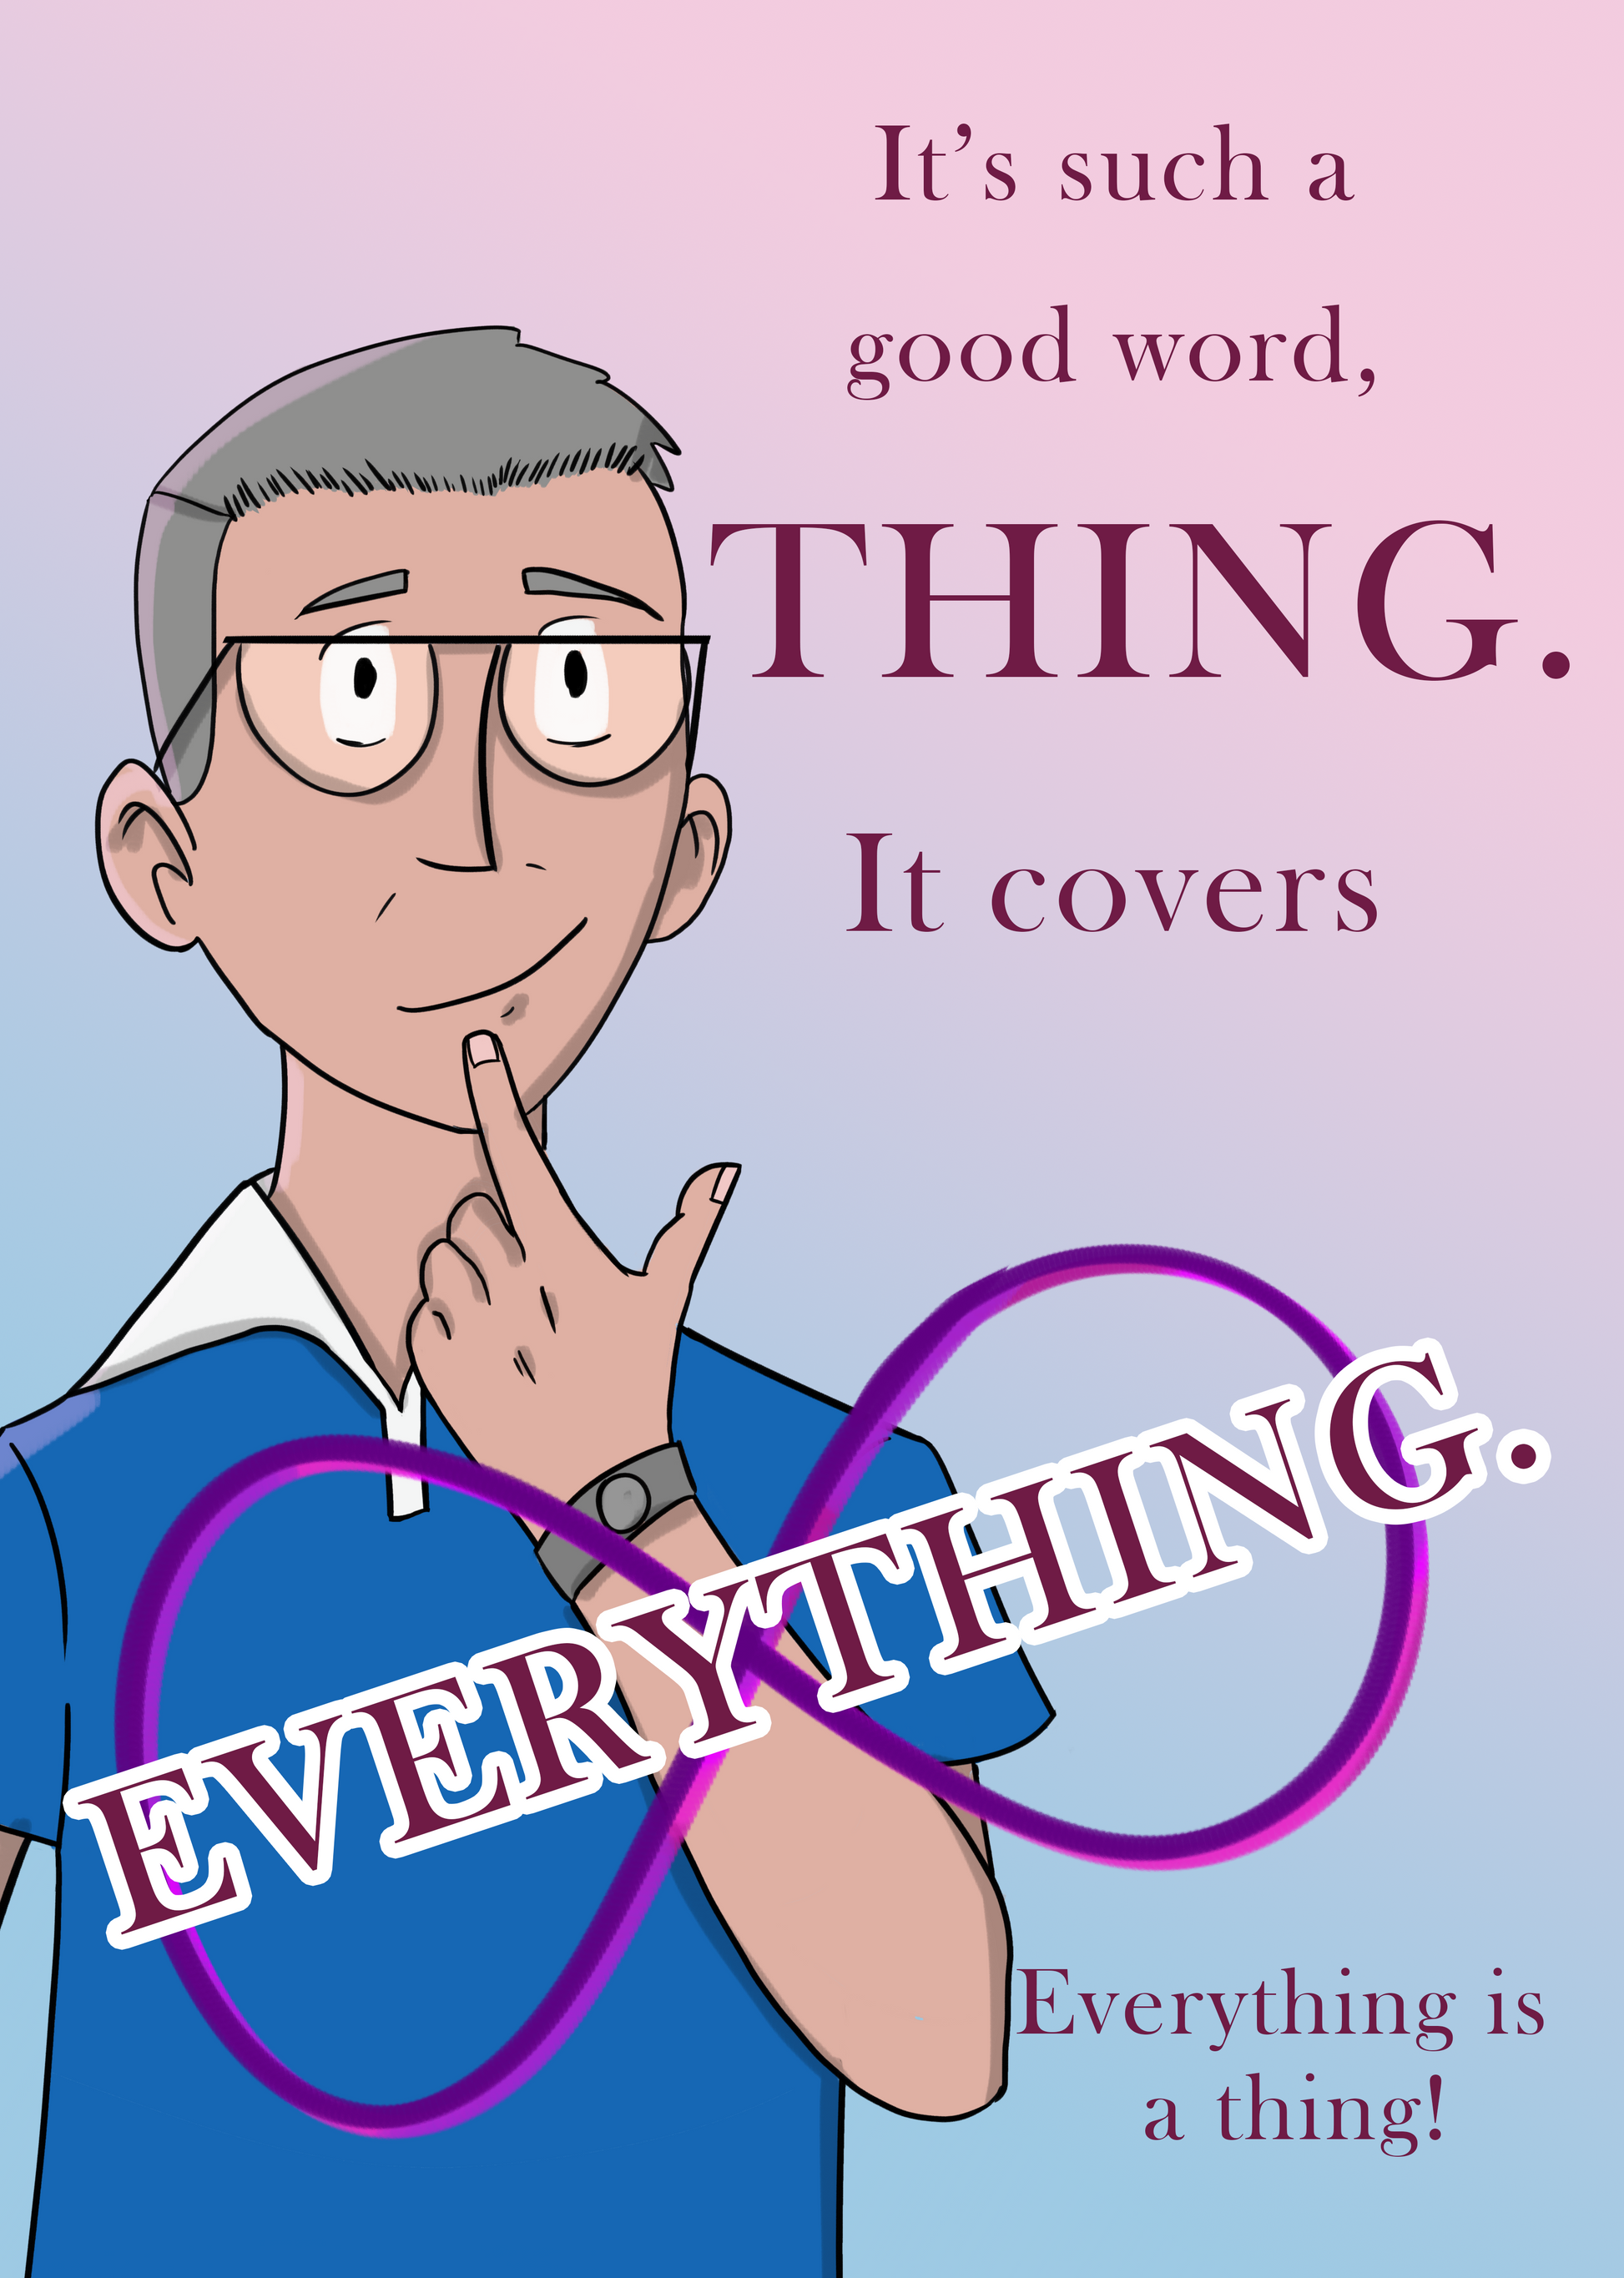 A preview of one of the pages of the illustrated book "It's A Thing!" by Ian and Cathy Marshall illustrated by Kate McCullough. The left side of the page is mostly taken up by a large illustration of Ian wearing a blue shirt and tapping his forefinger to his chin in a thoughtful pose. The text reads "It's such a good word, thing. It covers everything. Everything is a thing!".